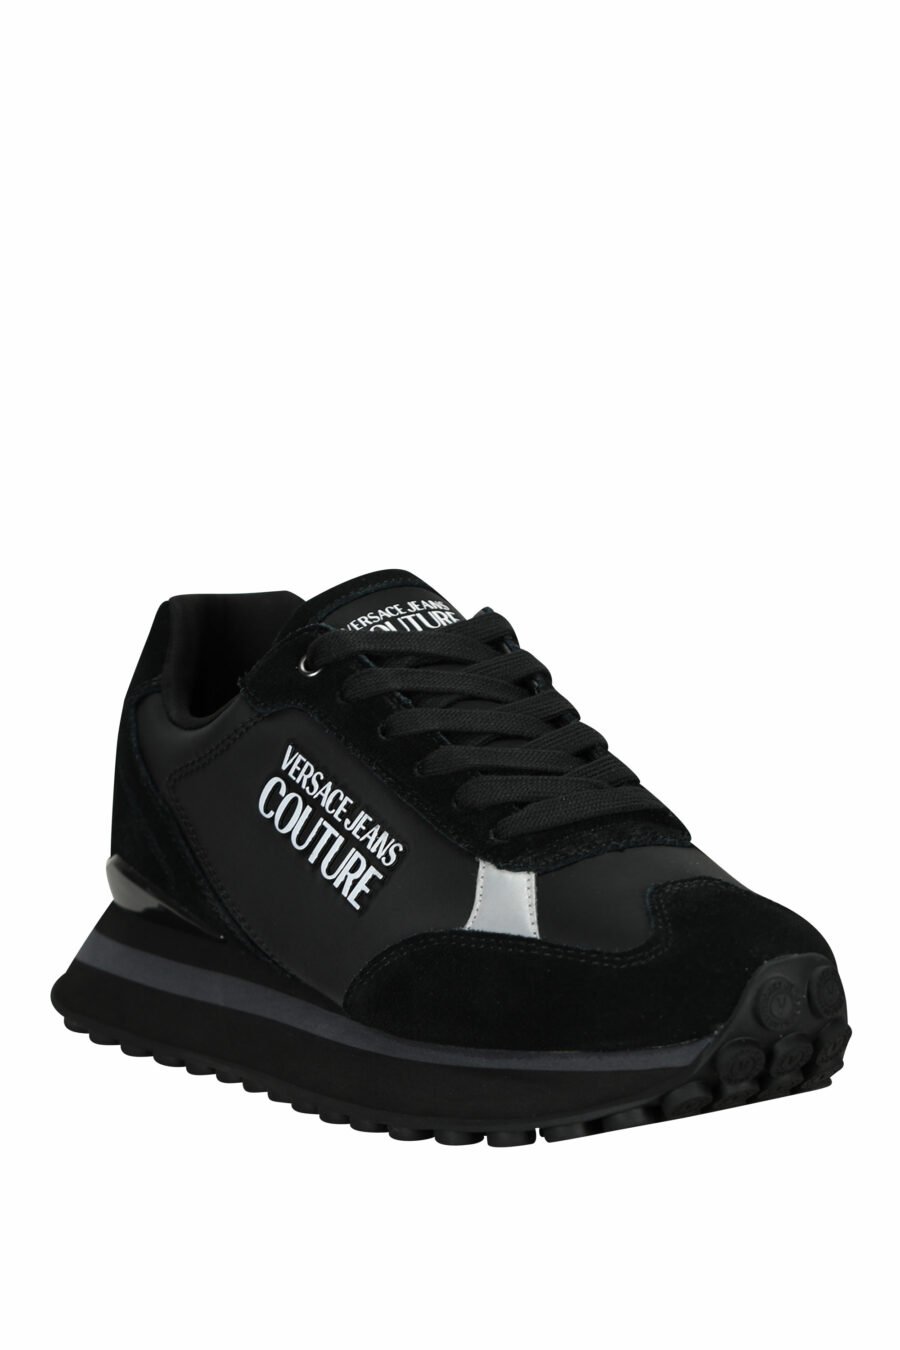 Black mix trainers with white mini-logo and black sole - 8052019606362 1